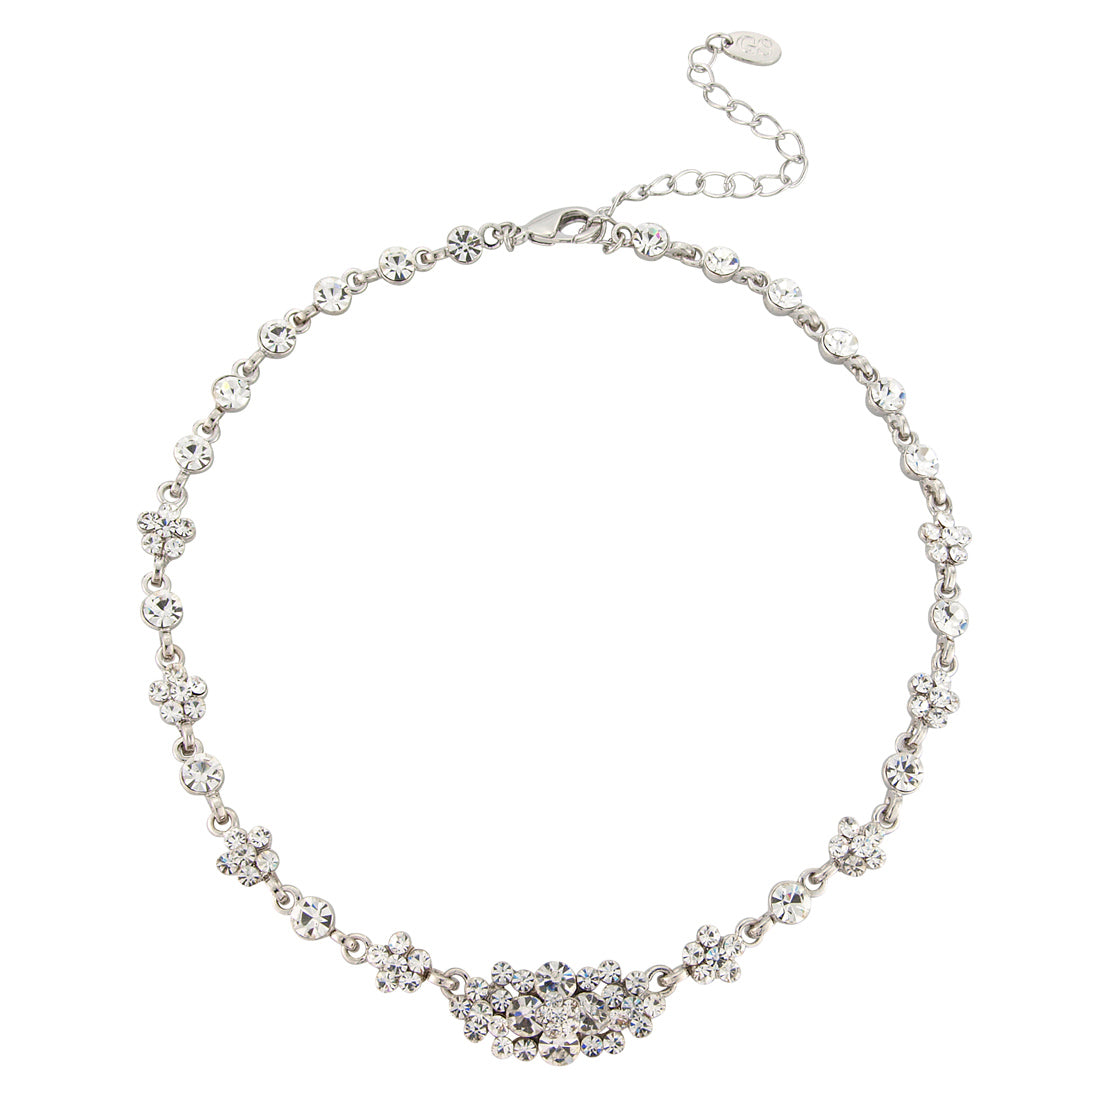 Starlet of Class vintage crystal wedding necklace